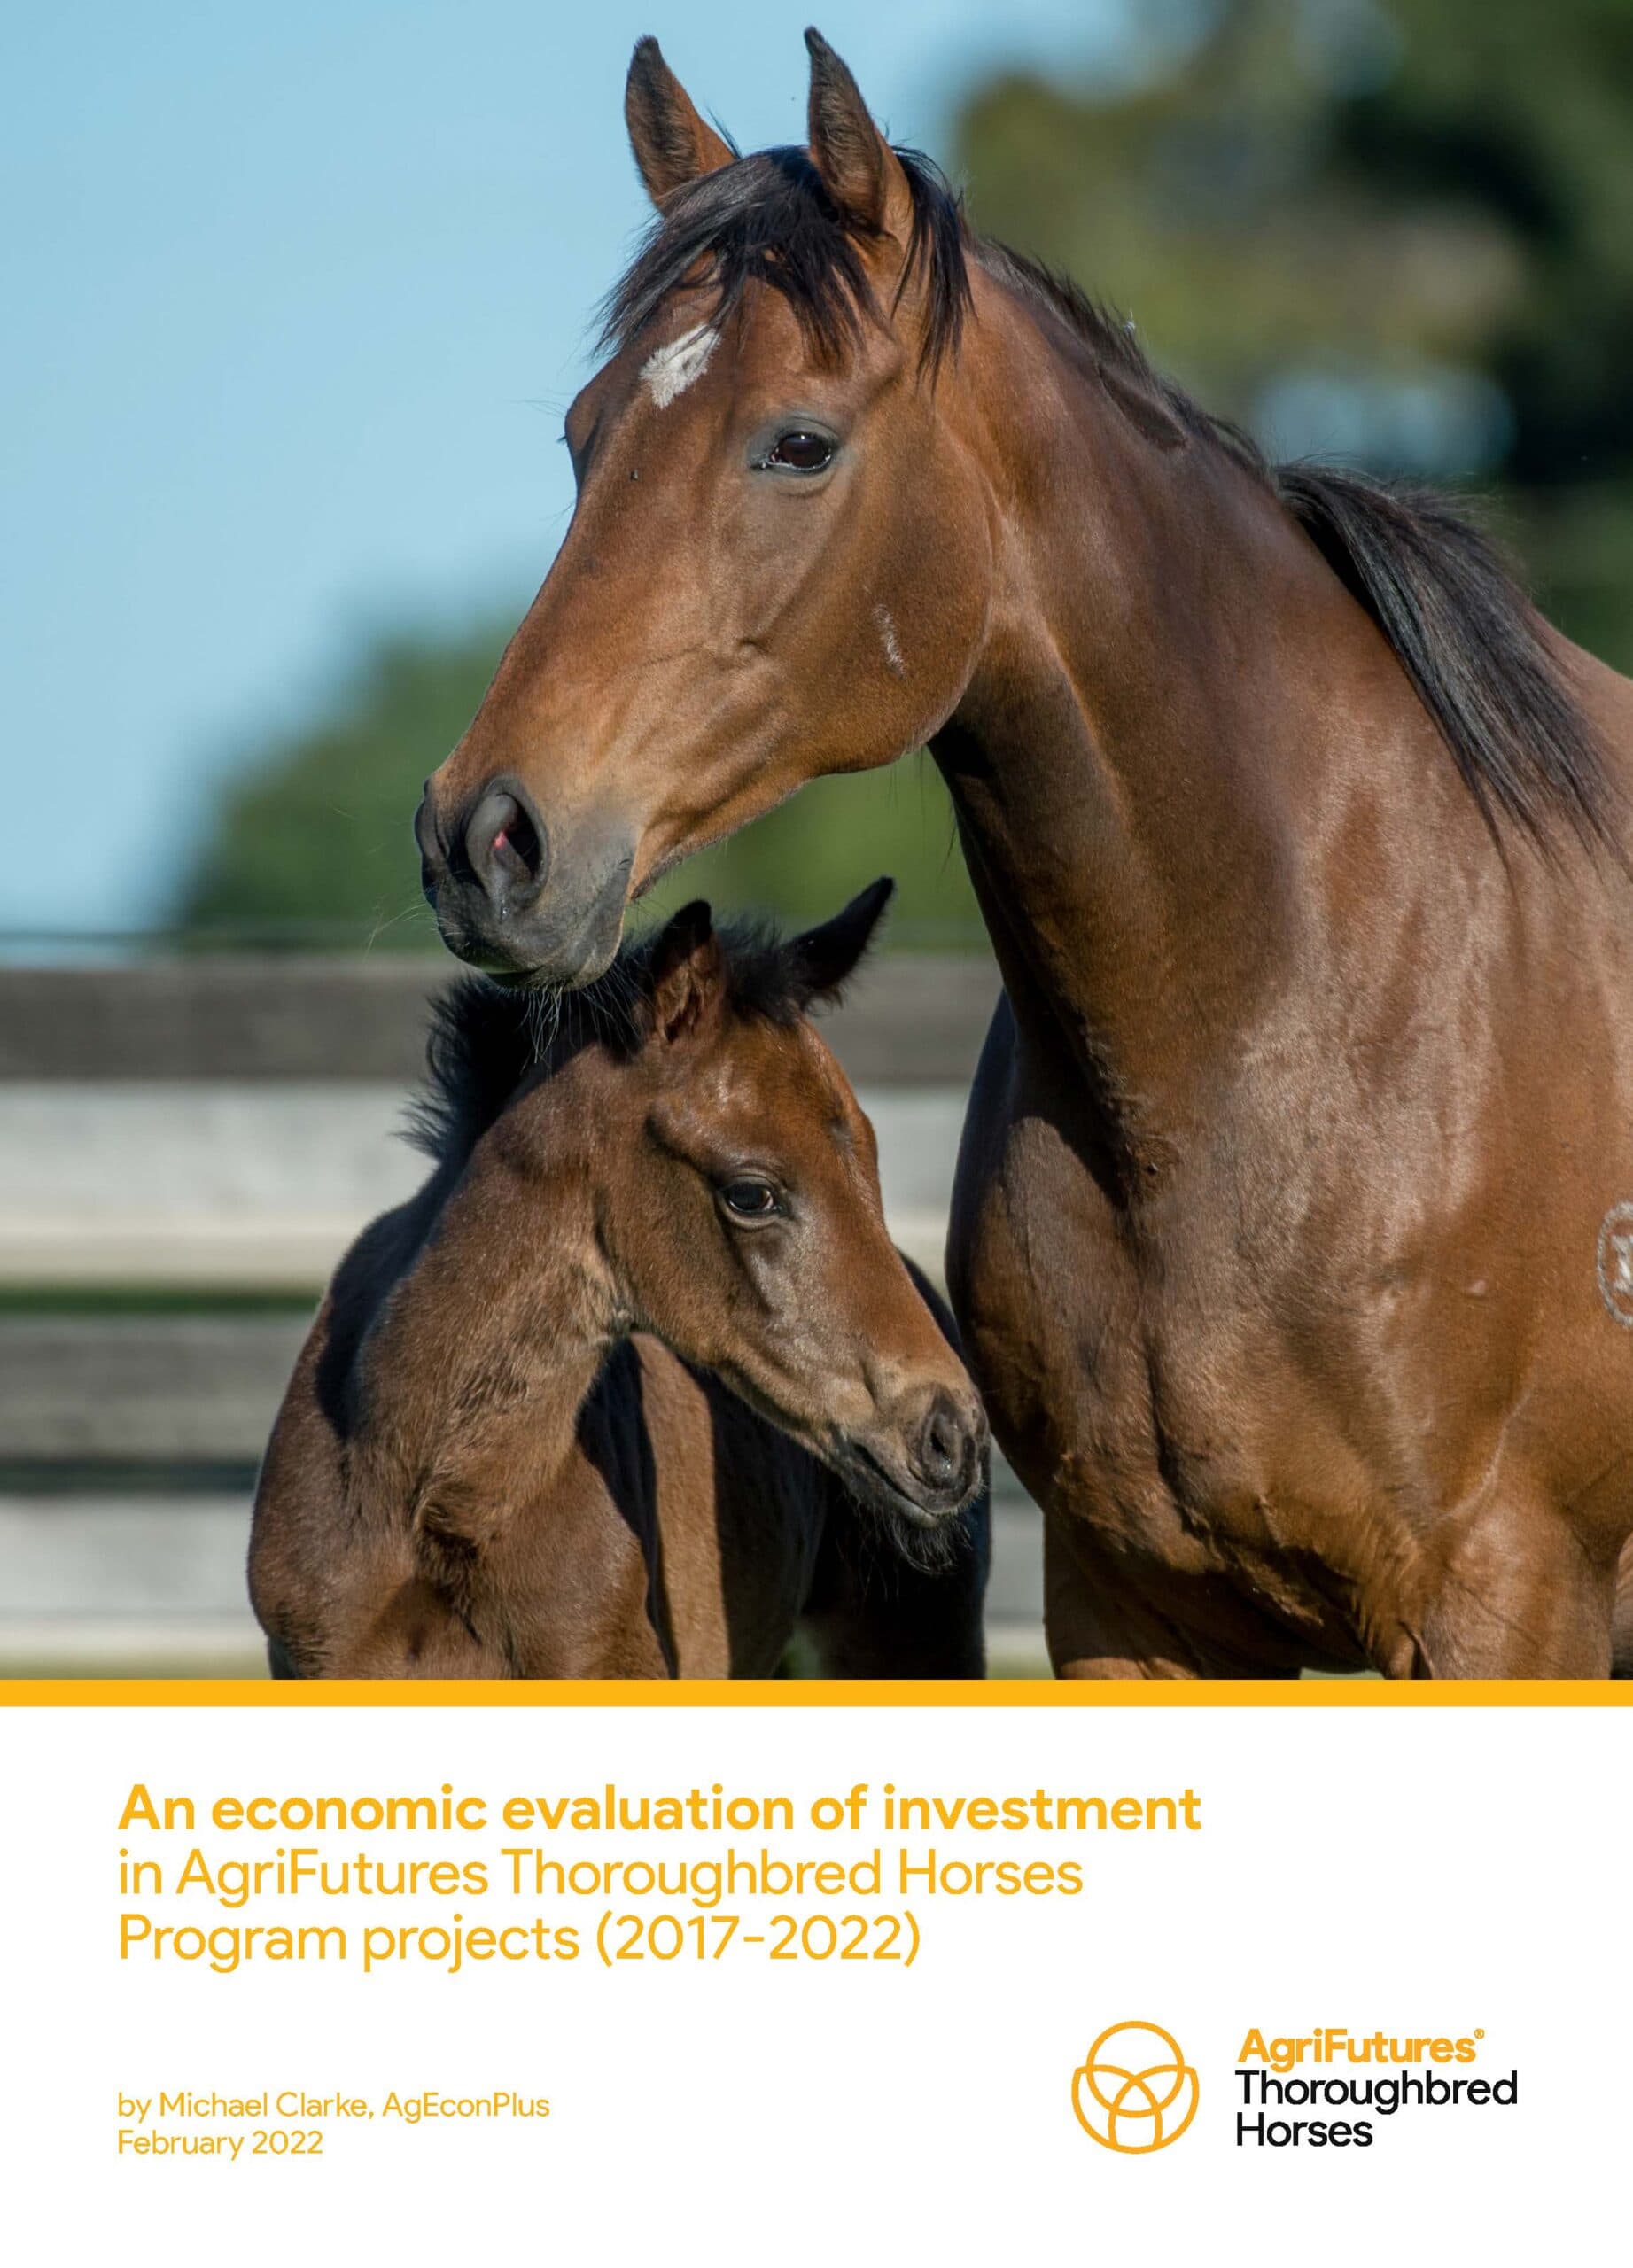 An economic evaluation of investment in AgriFutures Thoroughbred Horses Program projects (2017-2022) - image